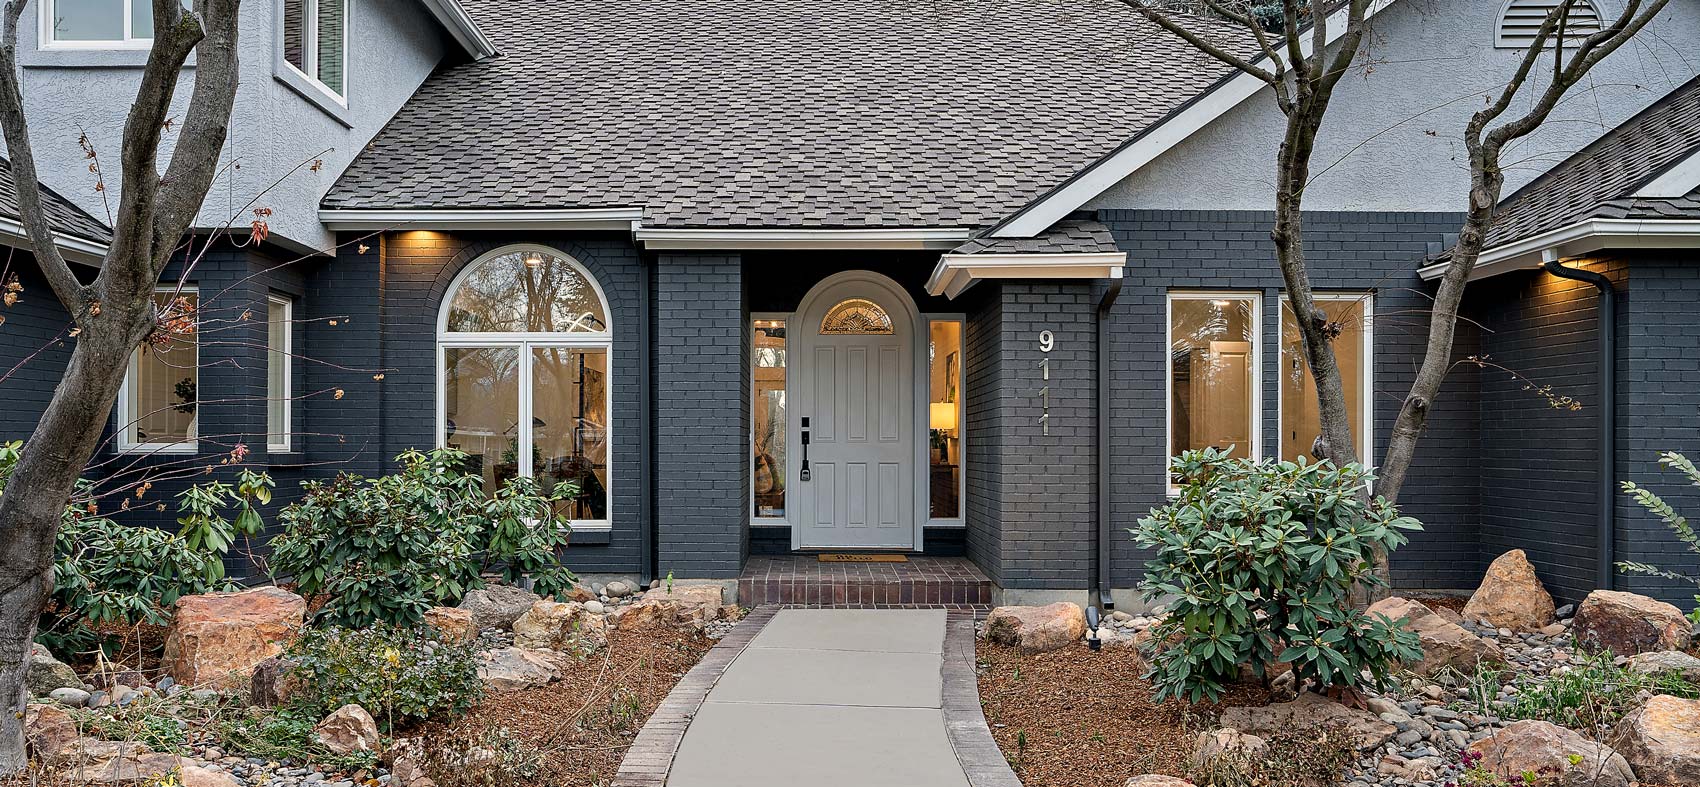 Painted Brick Home with White Front Door